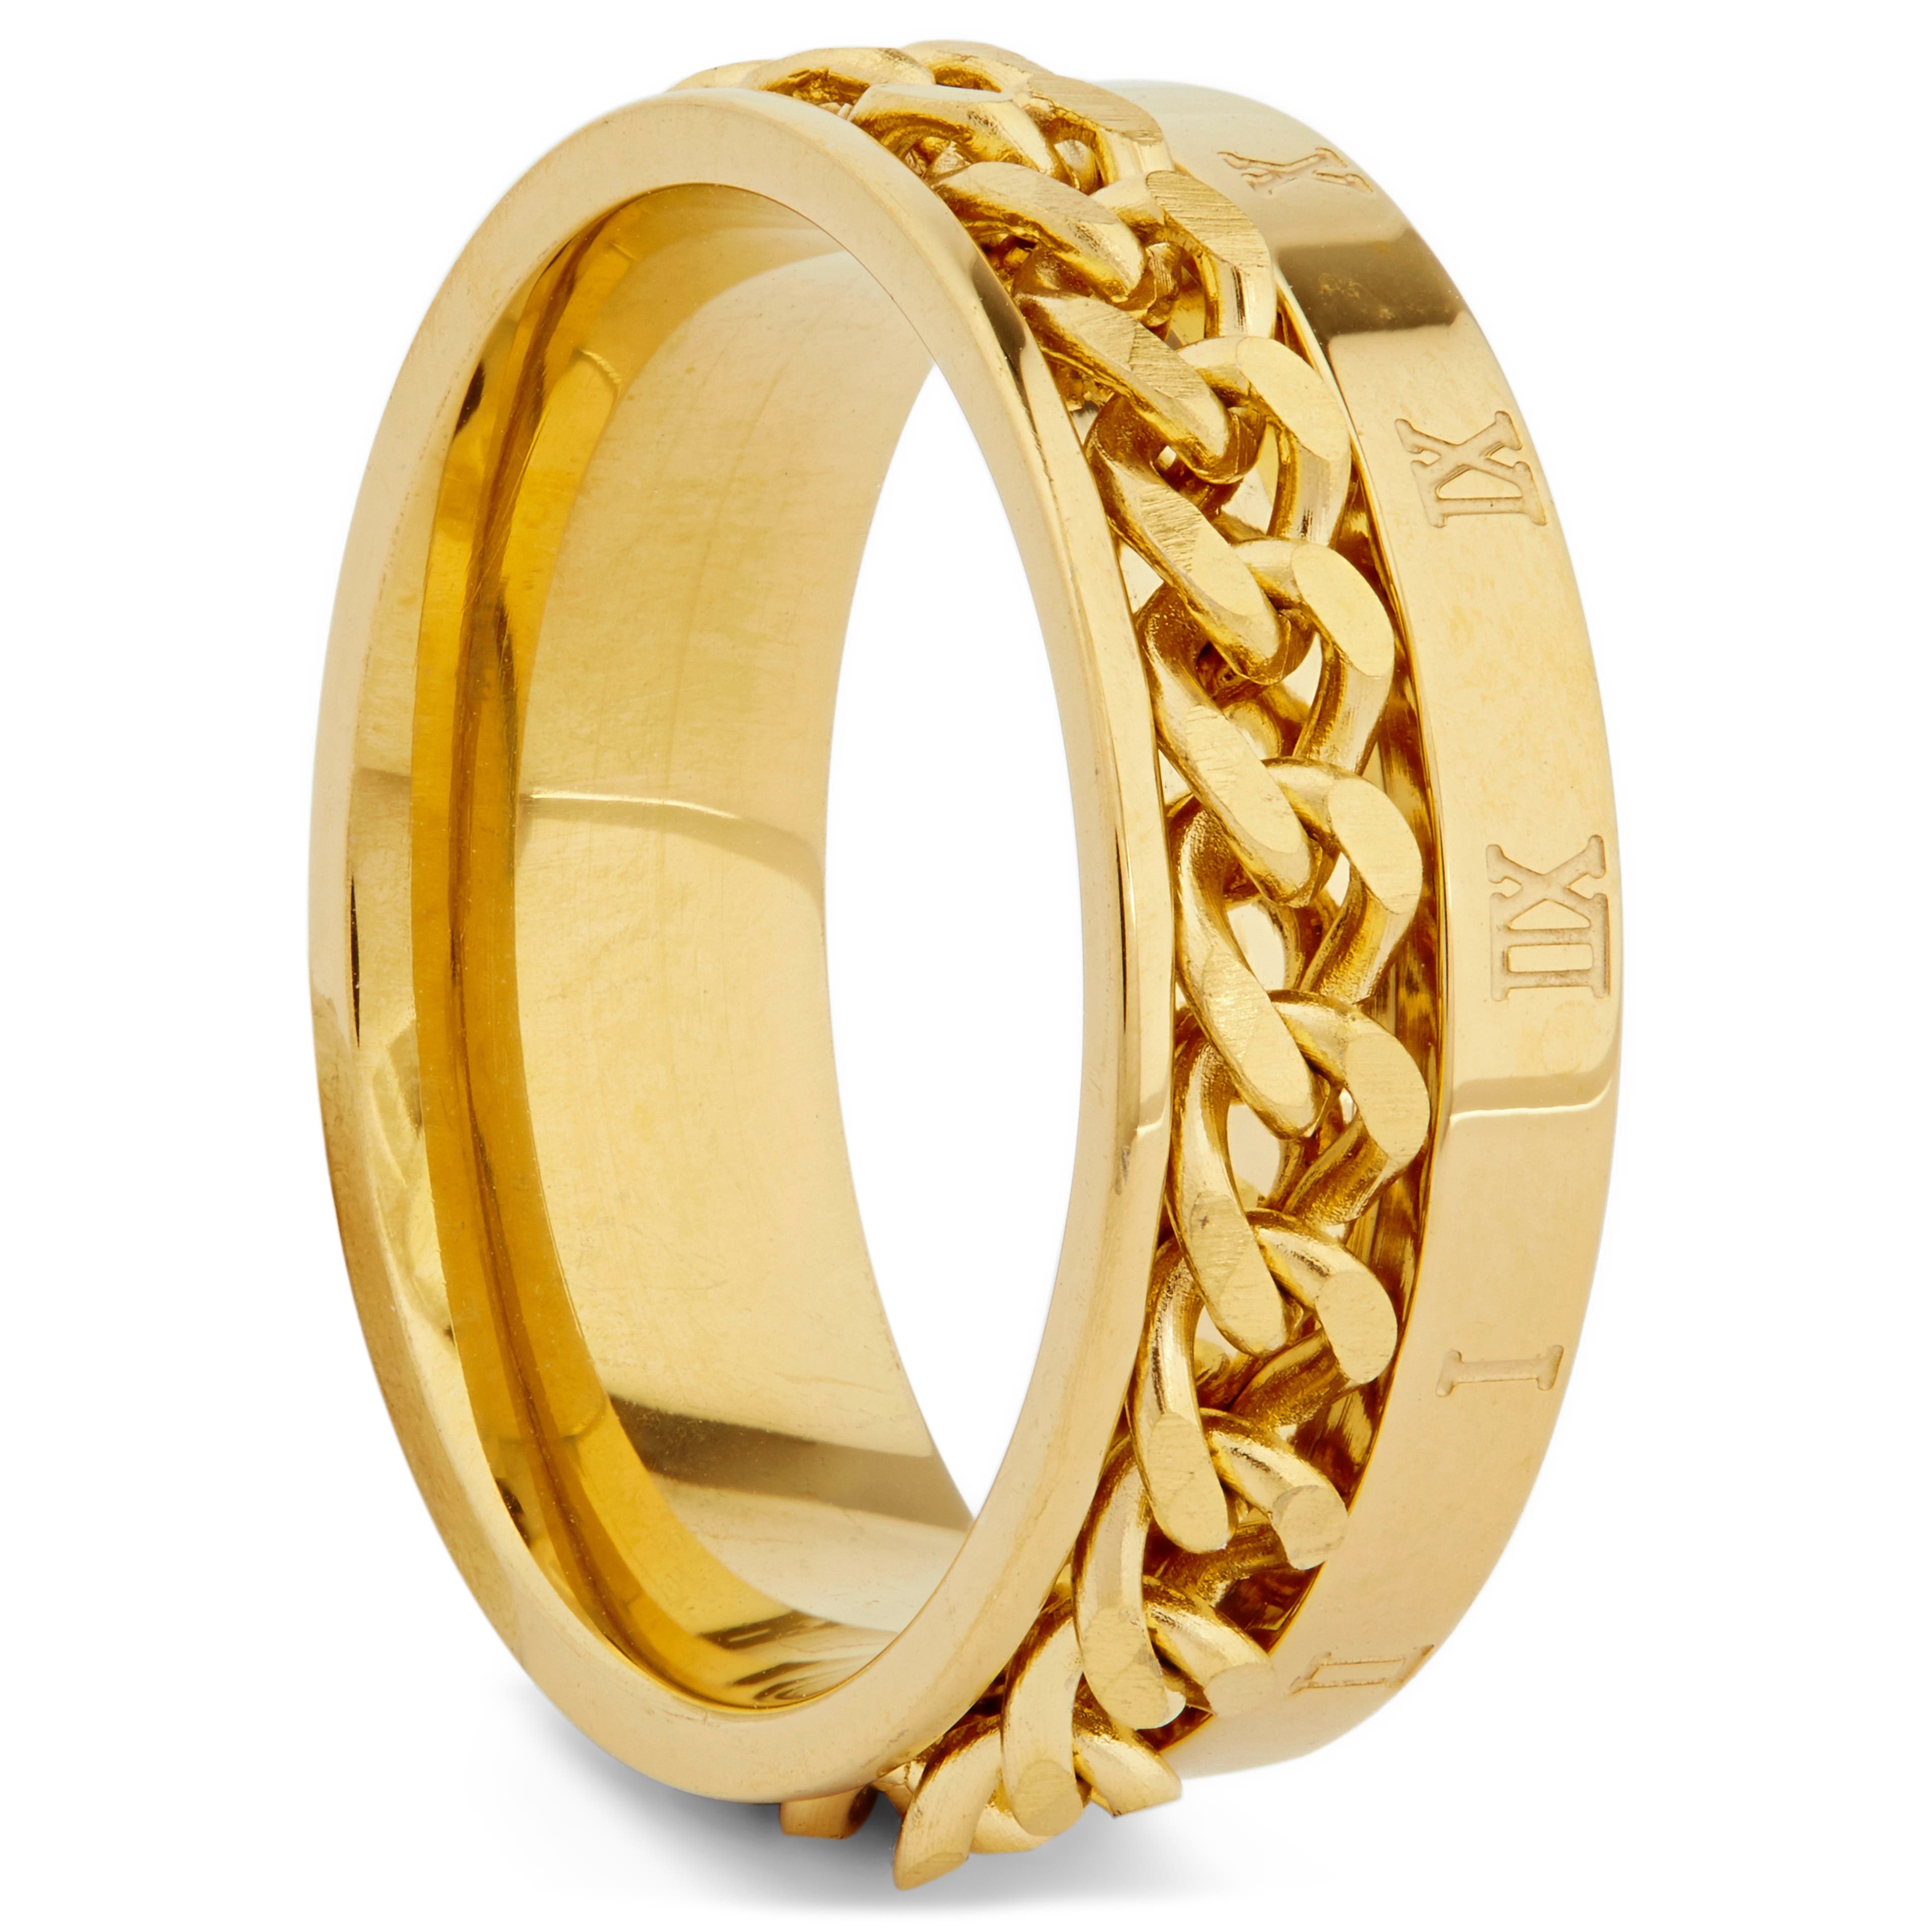 8 mm Gold-Tone With Chunky Chain & Roman Numerals Ring